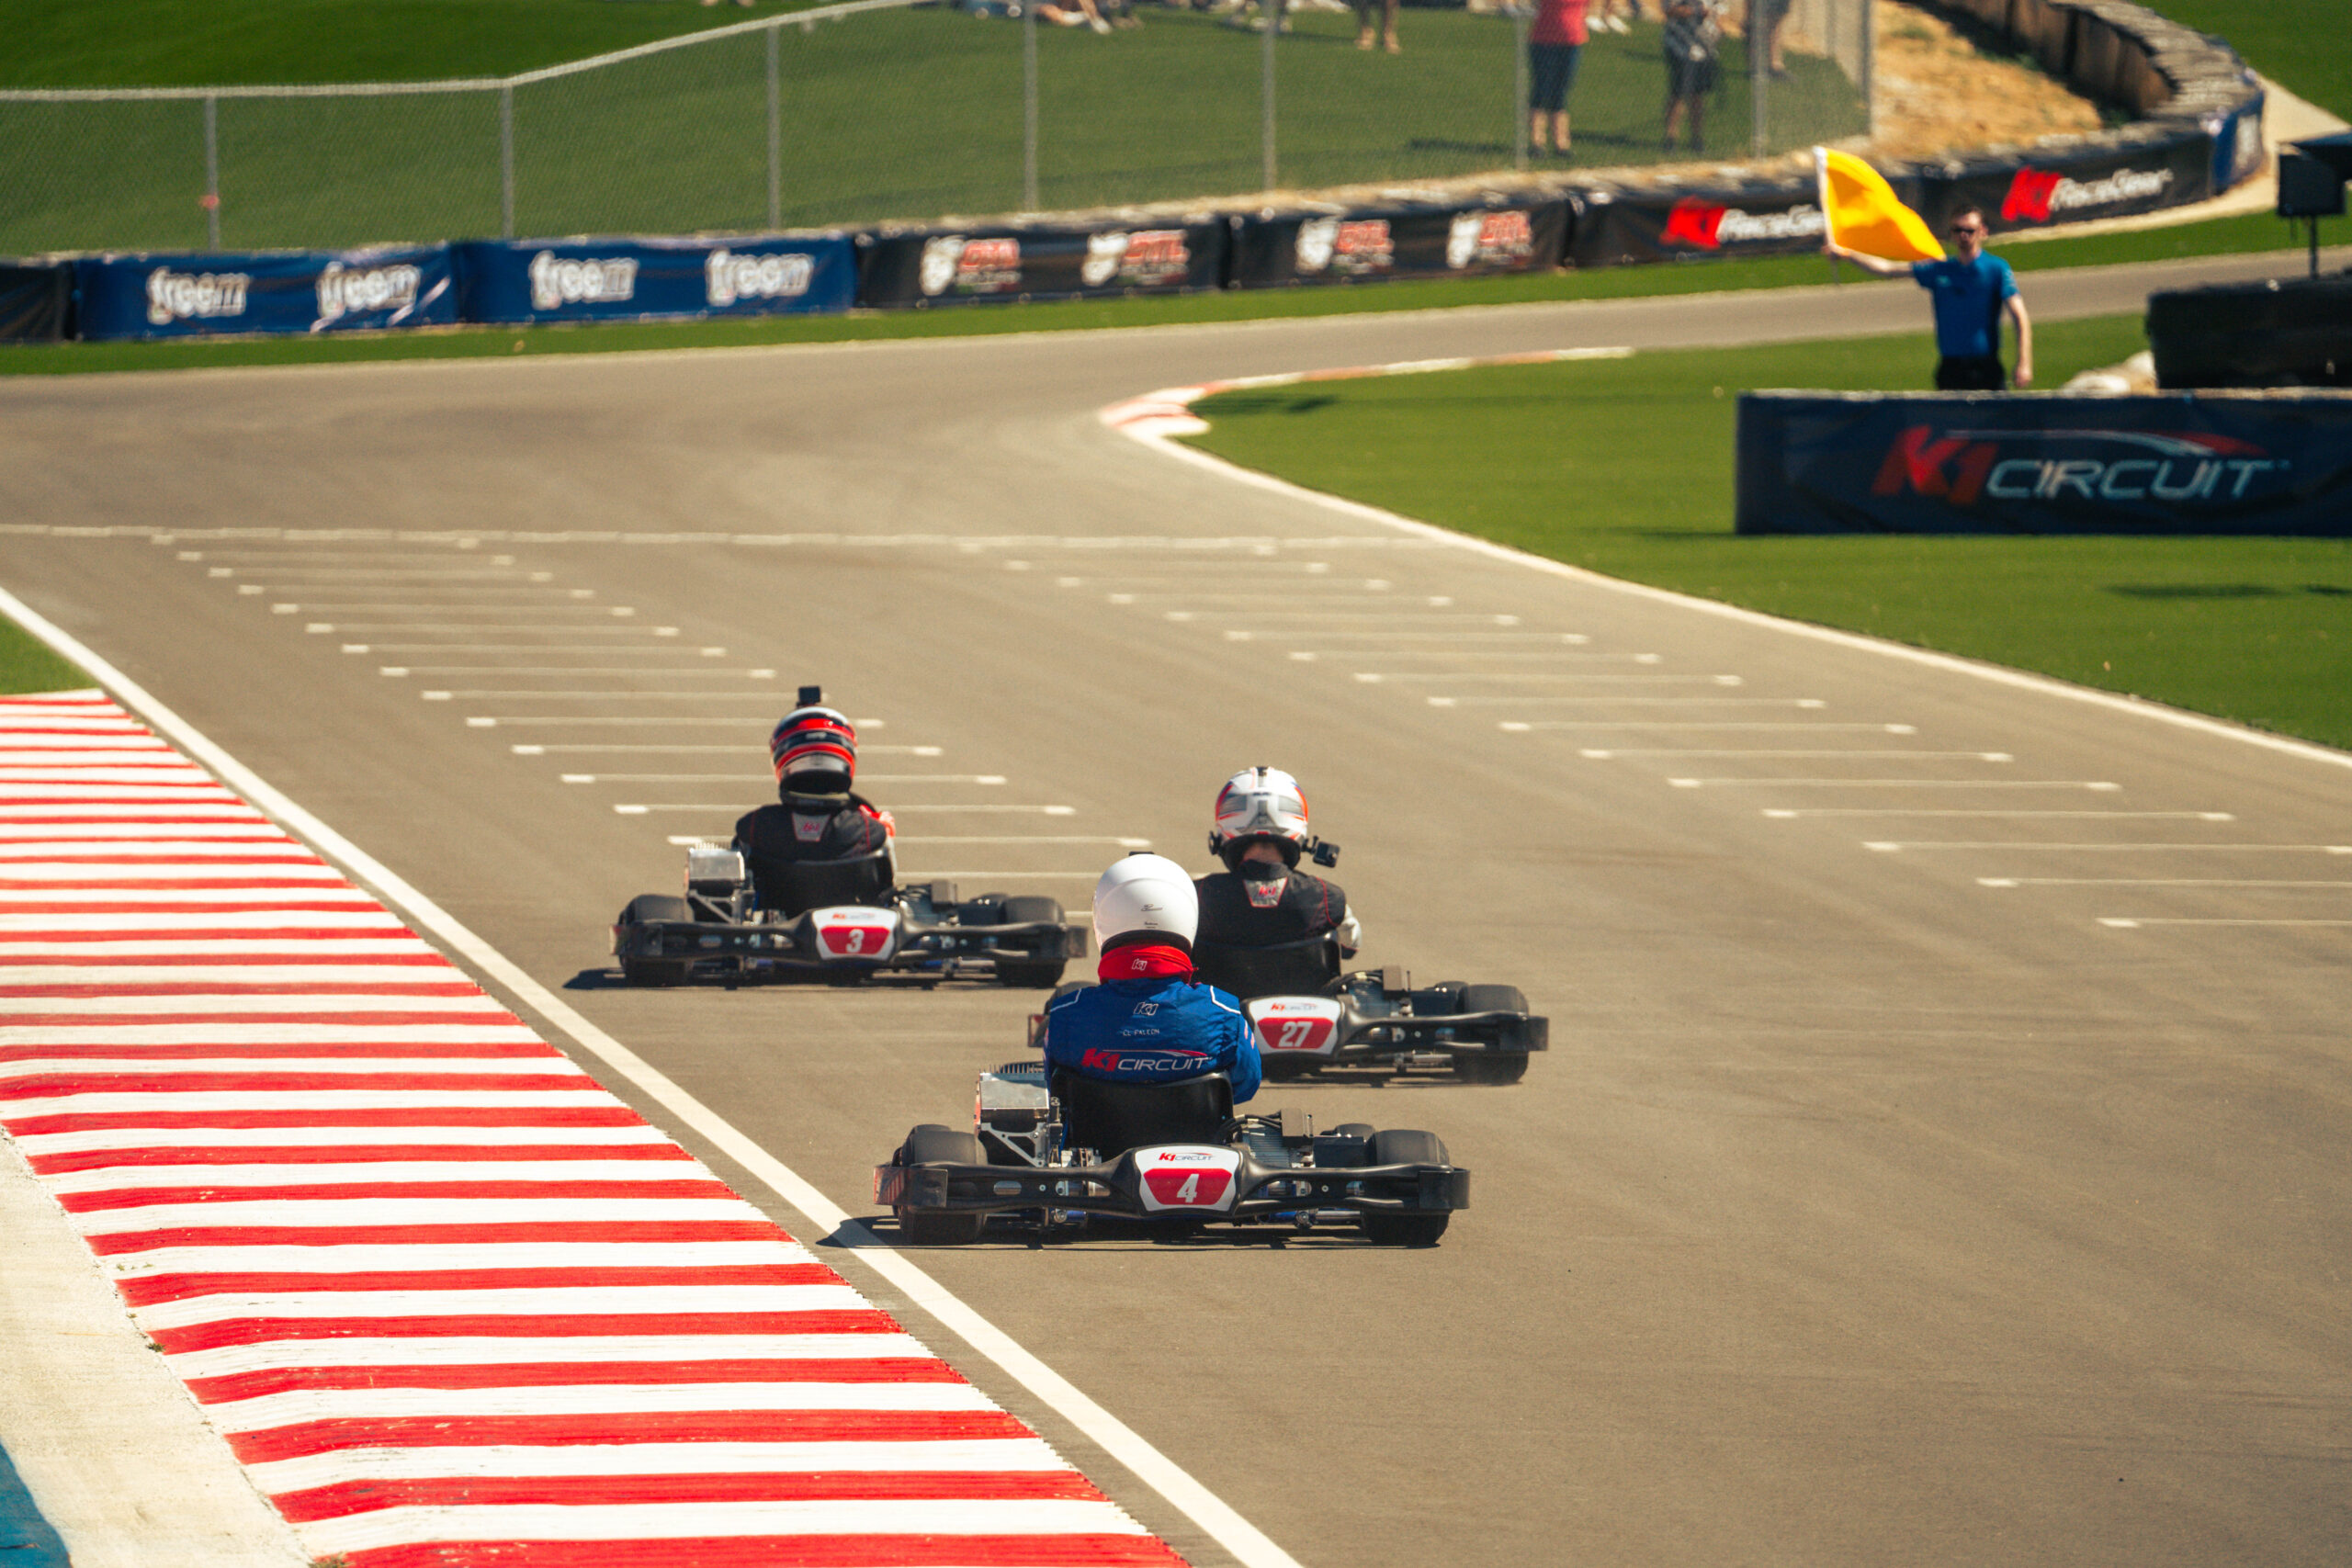 three go karts race down the straight at k1 circuit